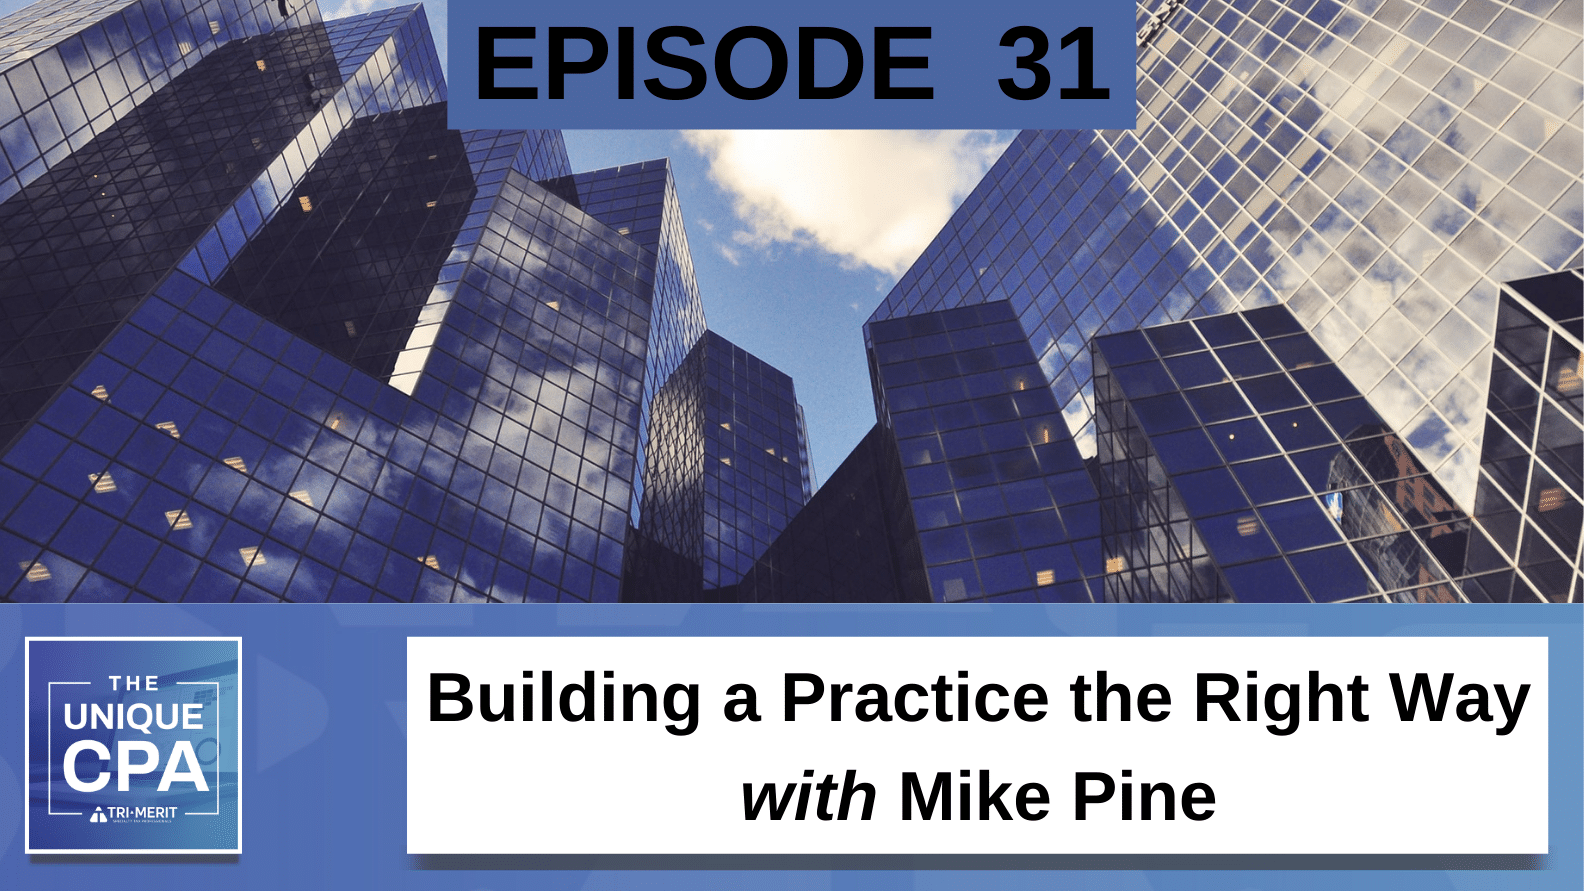 Unique Cpa Featured Image Ep 31 Mike Pine - Building A Practice The Right Way - Tri-Merit